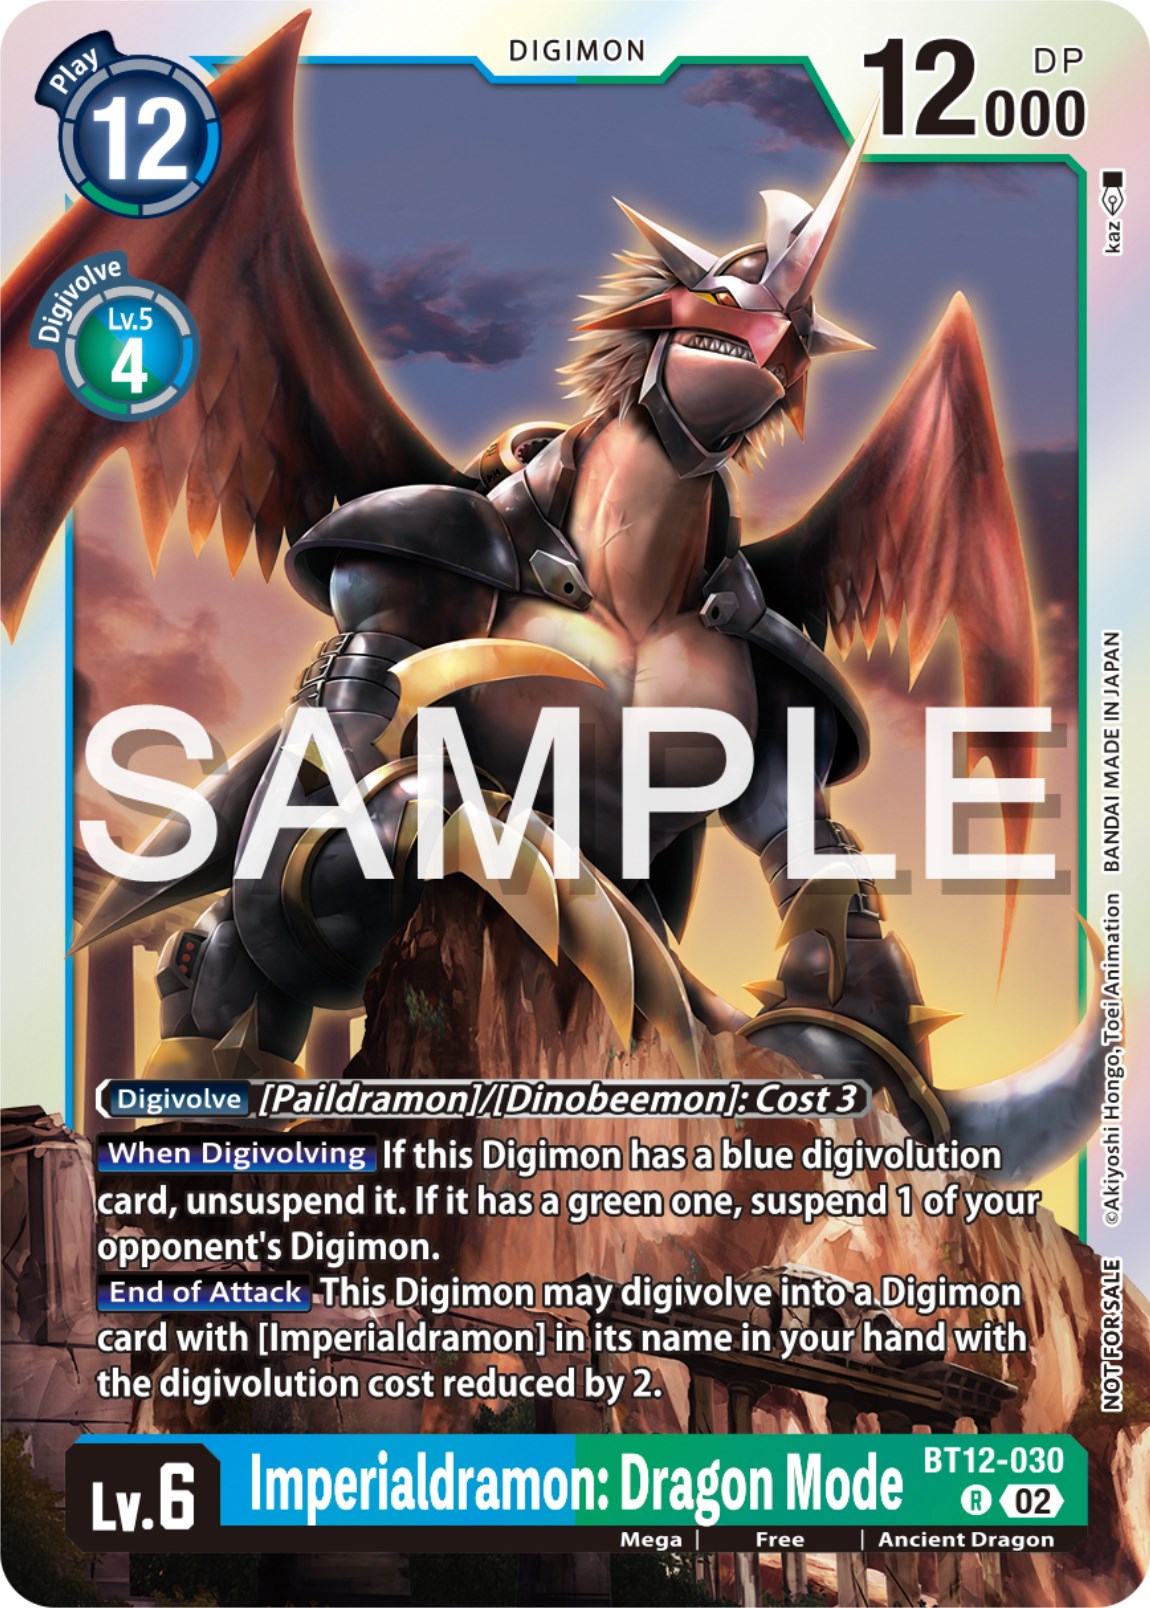 Imperialdramon: Dragon Mode [BT12-030] (Event Pack 6) [Across Time Promos] | Black Swamp Games